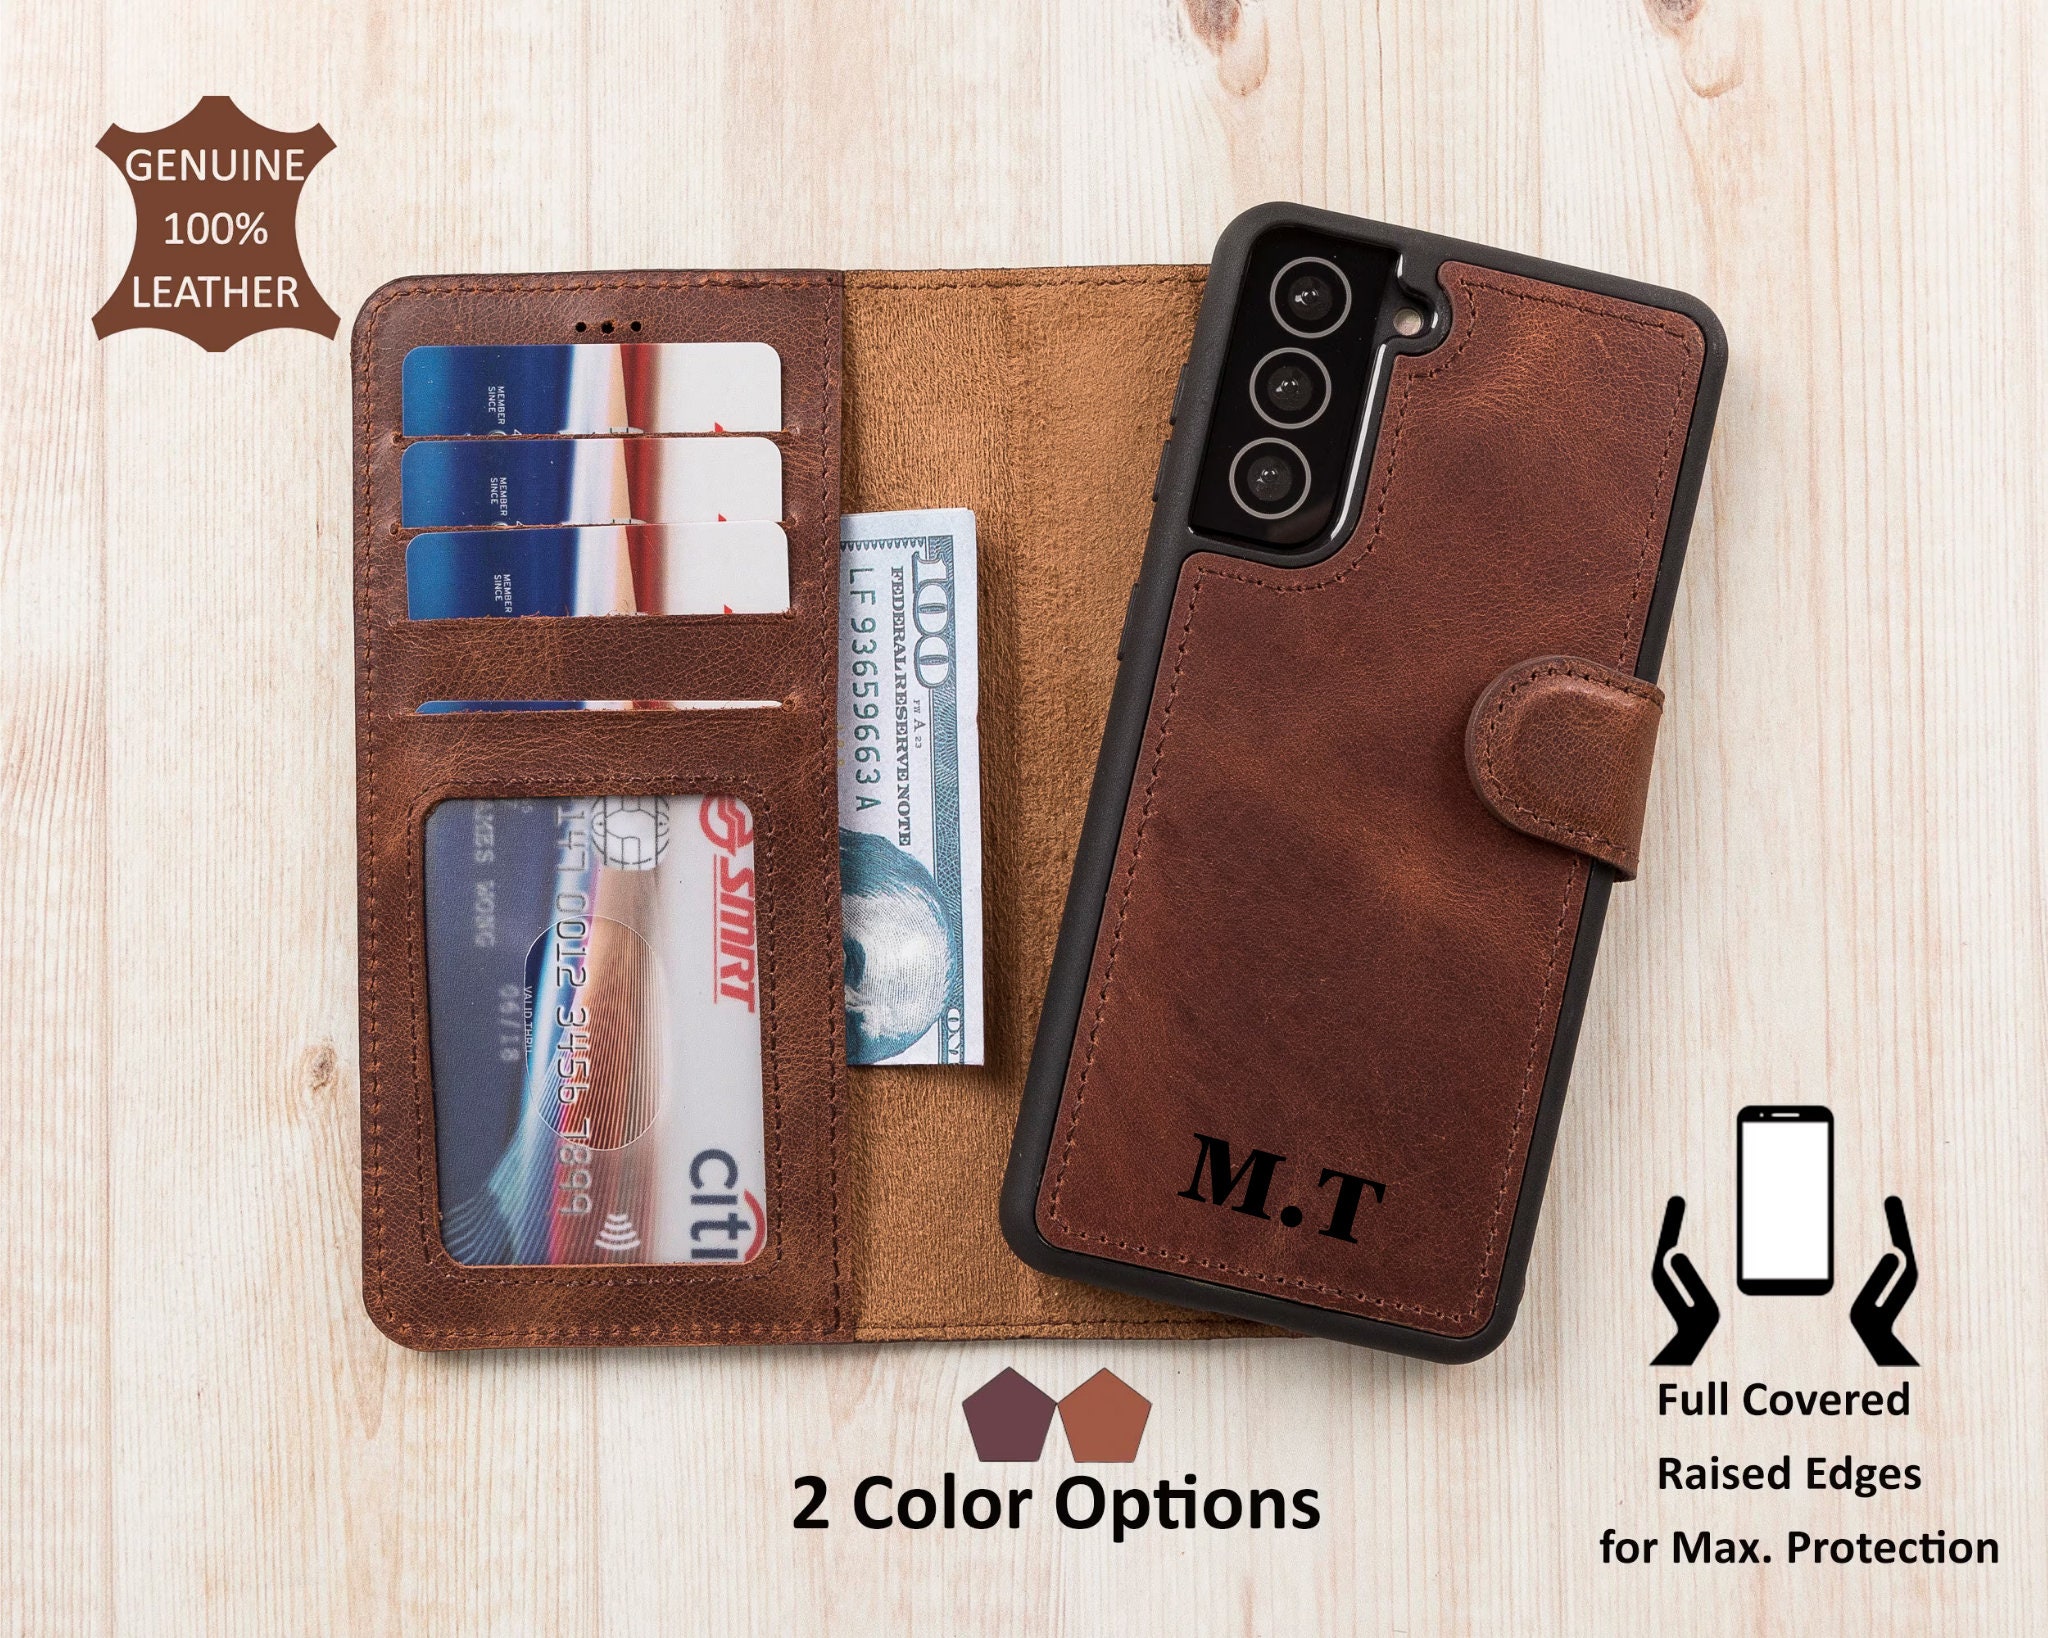 For Cubot Note 21 Retro Phone Case Leather Magnetic Folio Cover